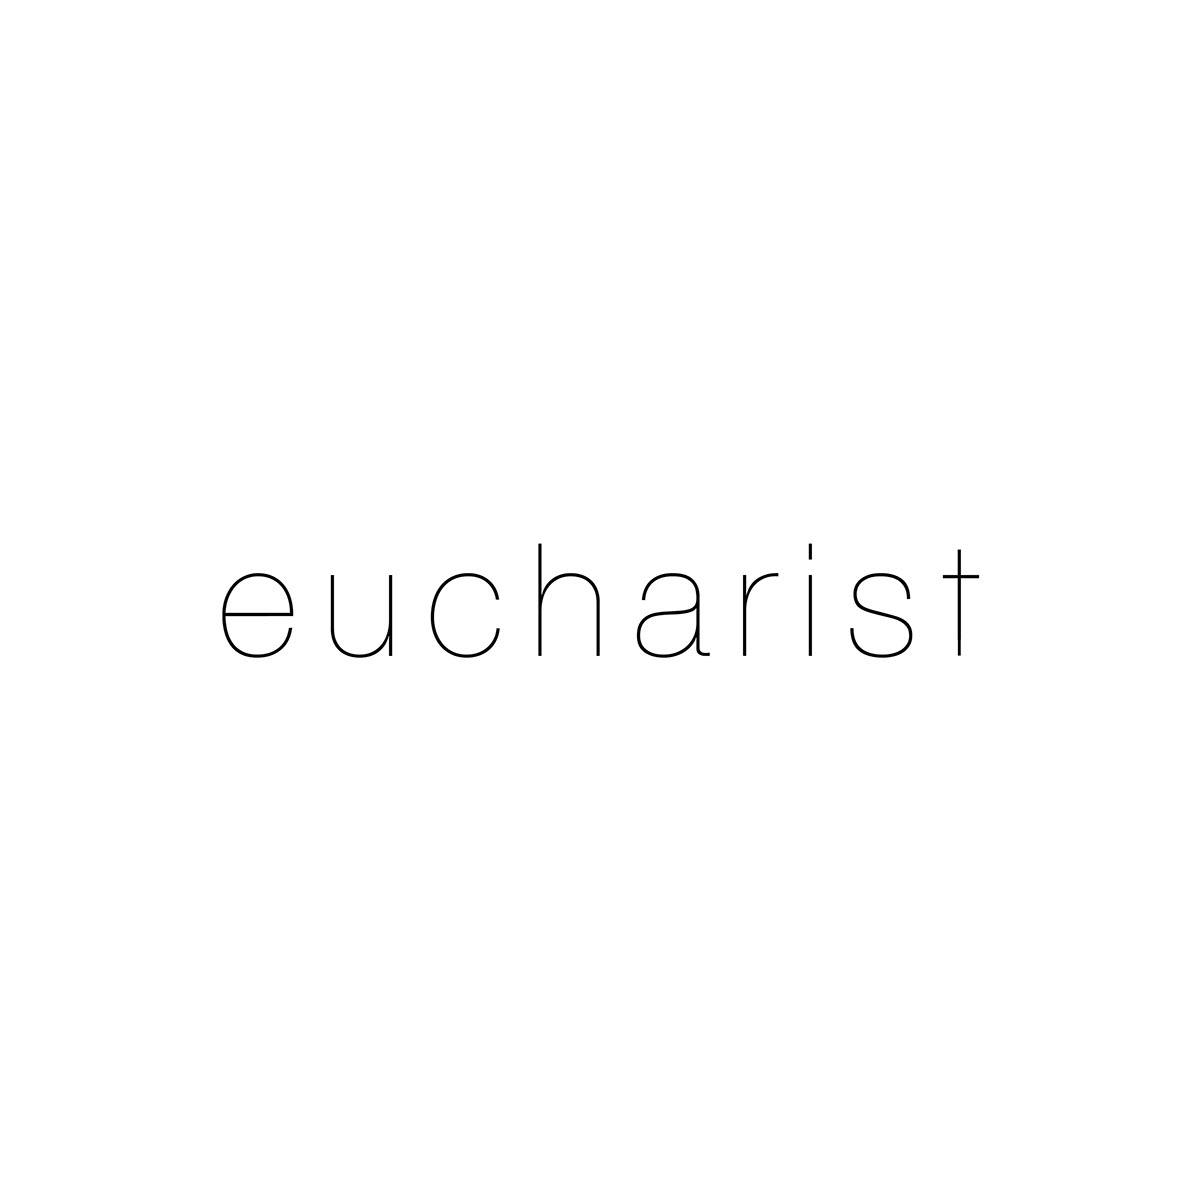 eucharist death row death inmate prison menu catering identity capital punishment texas law crime resturant lethal injection 